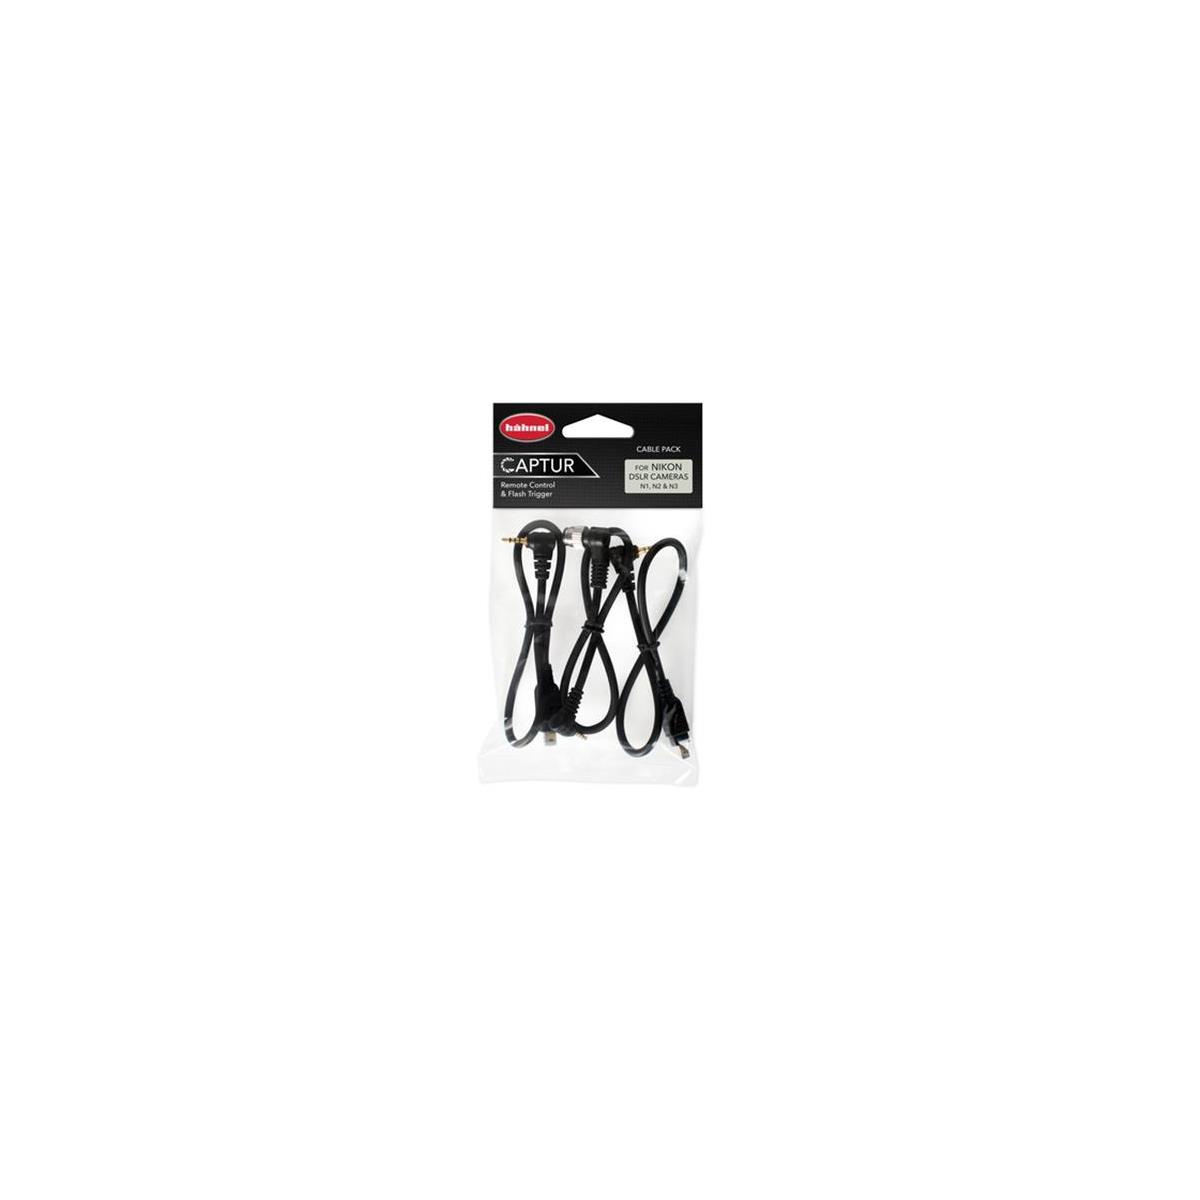 Image of Hahnel Nikon Camera Capcord Cable Pack